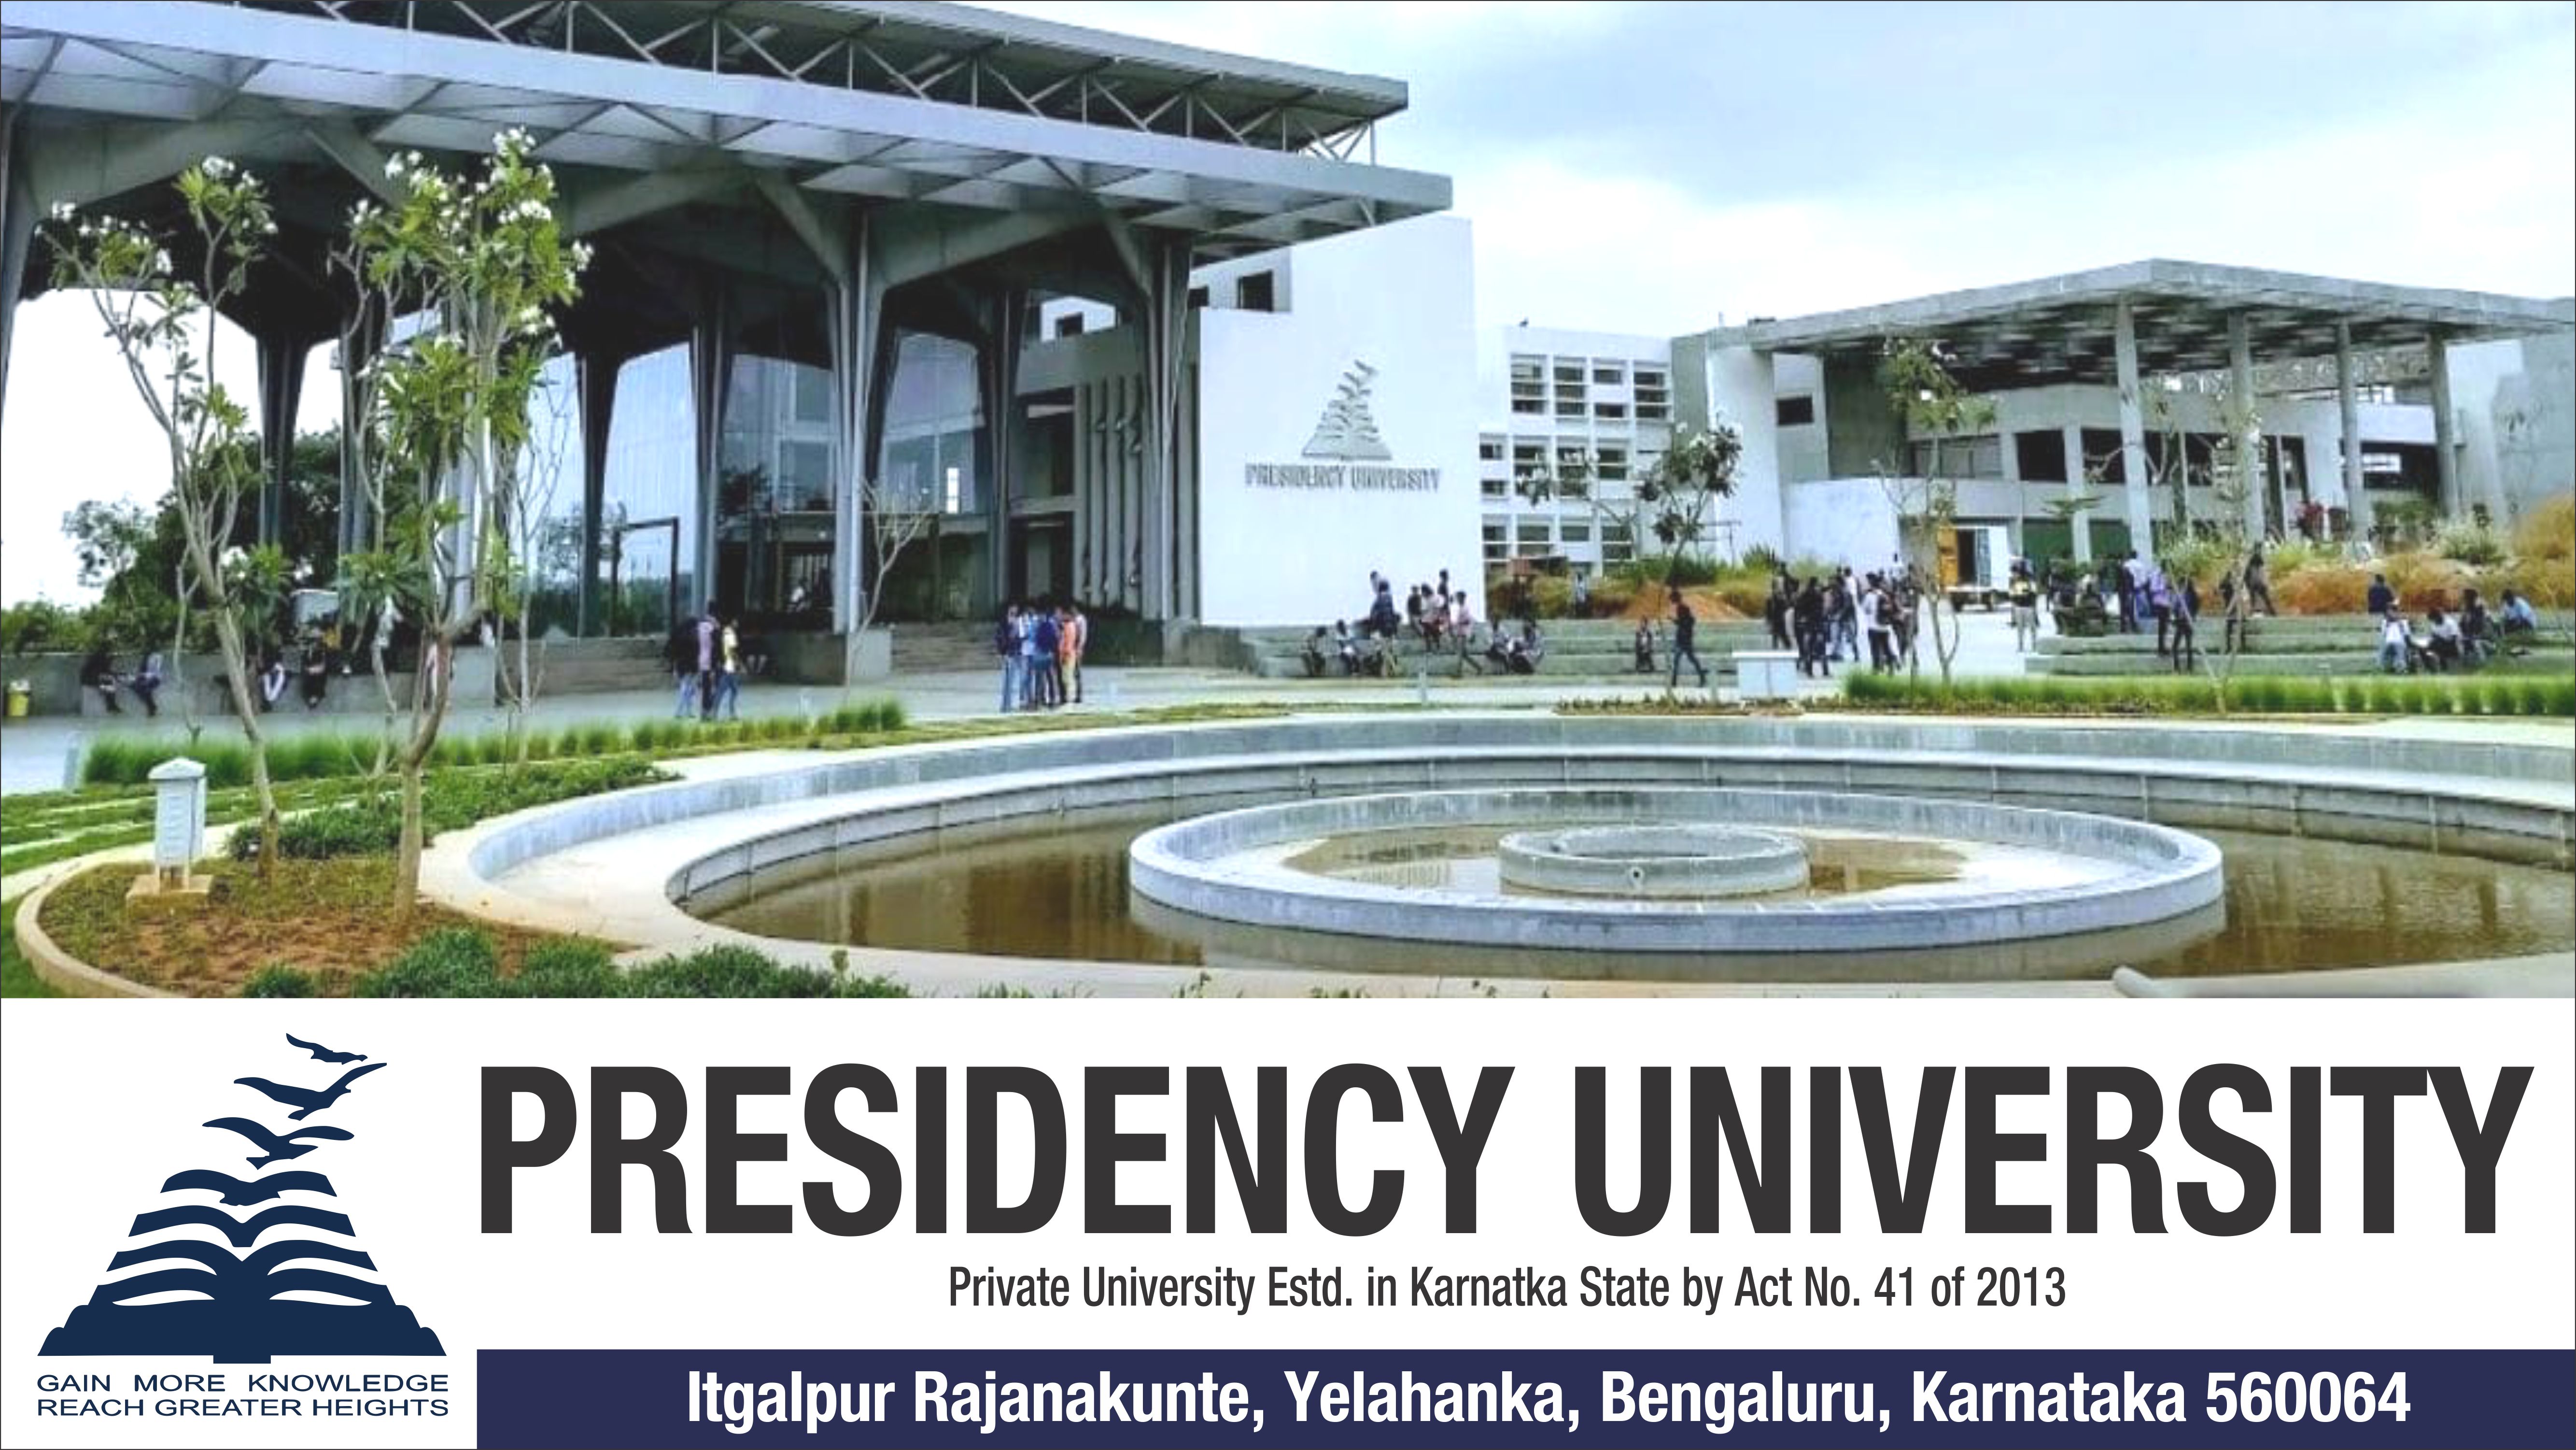 Out Side View of Presidency University, Bangalore